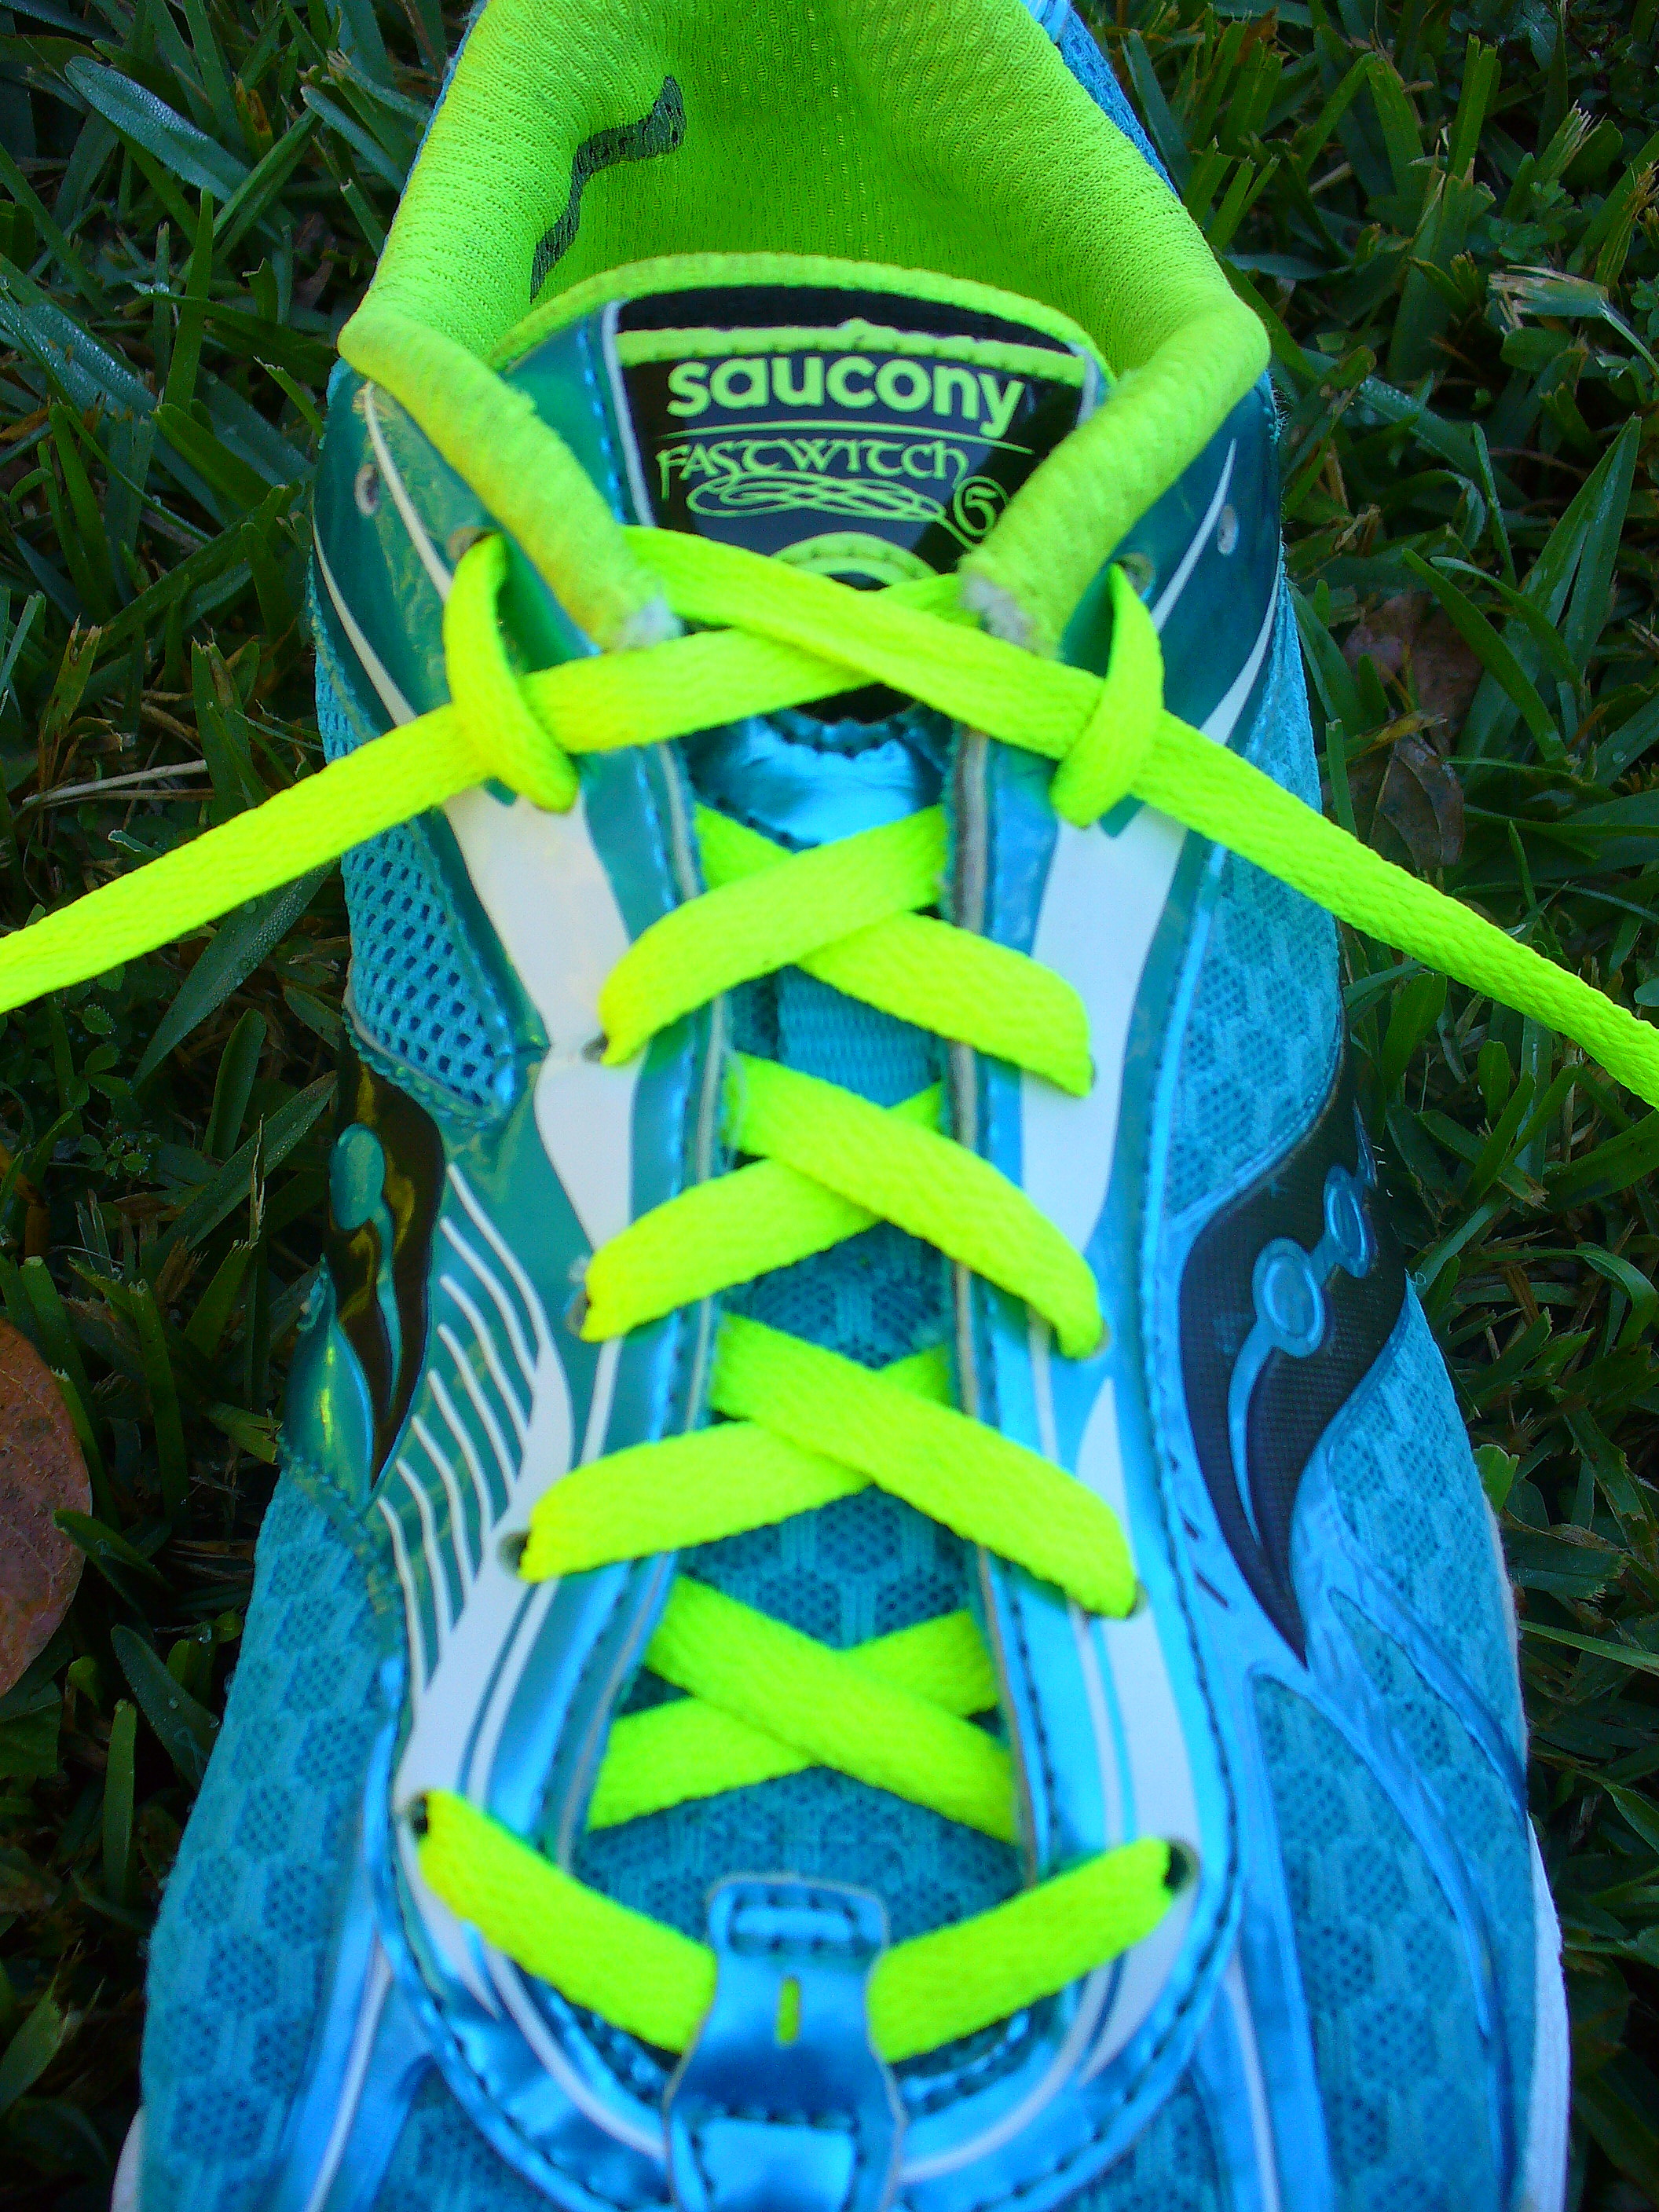 saucony running shoe laces